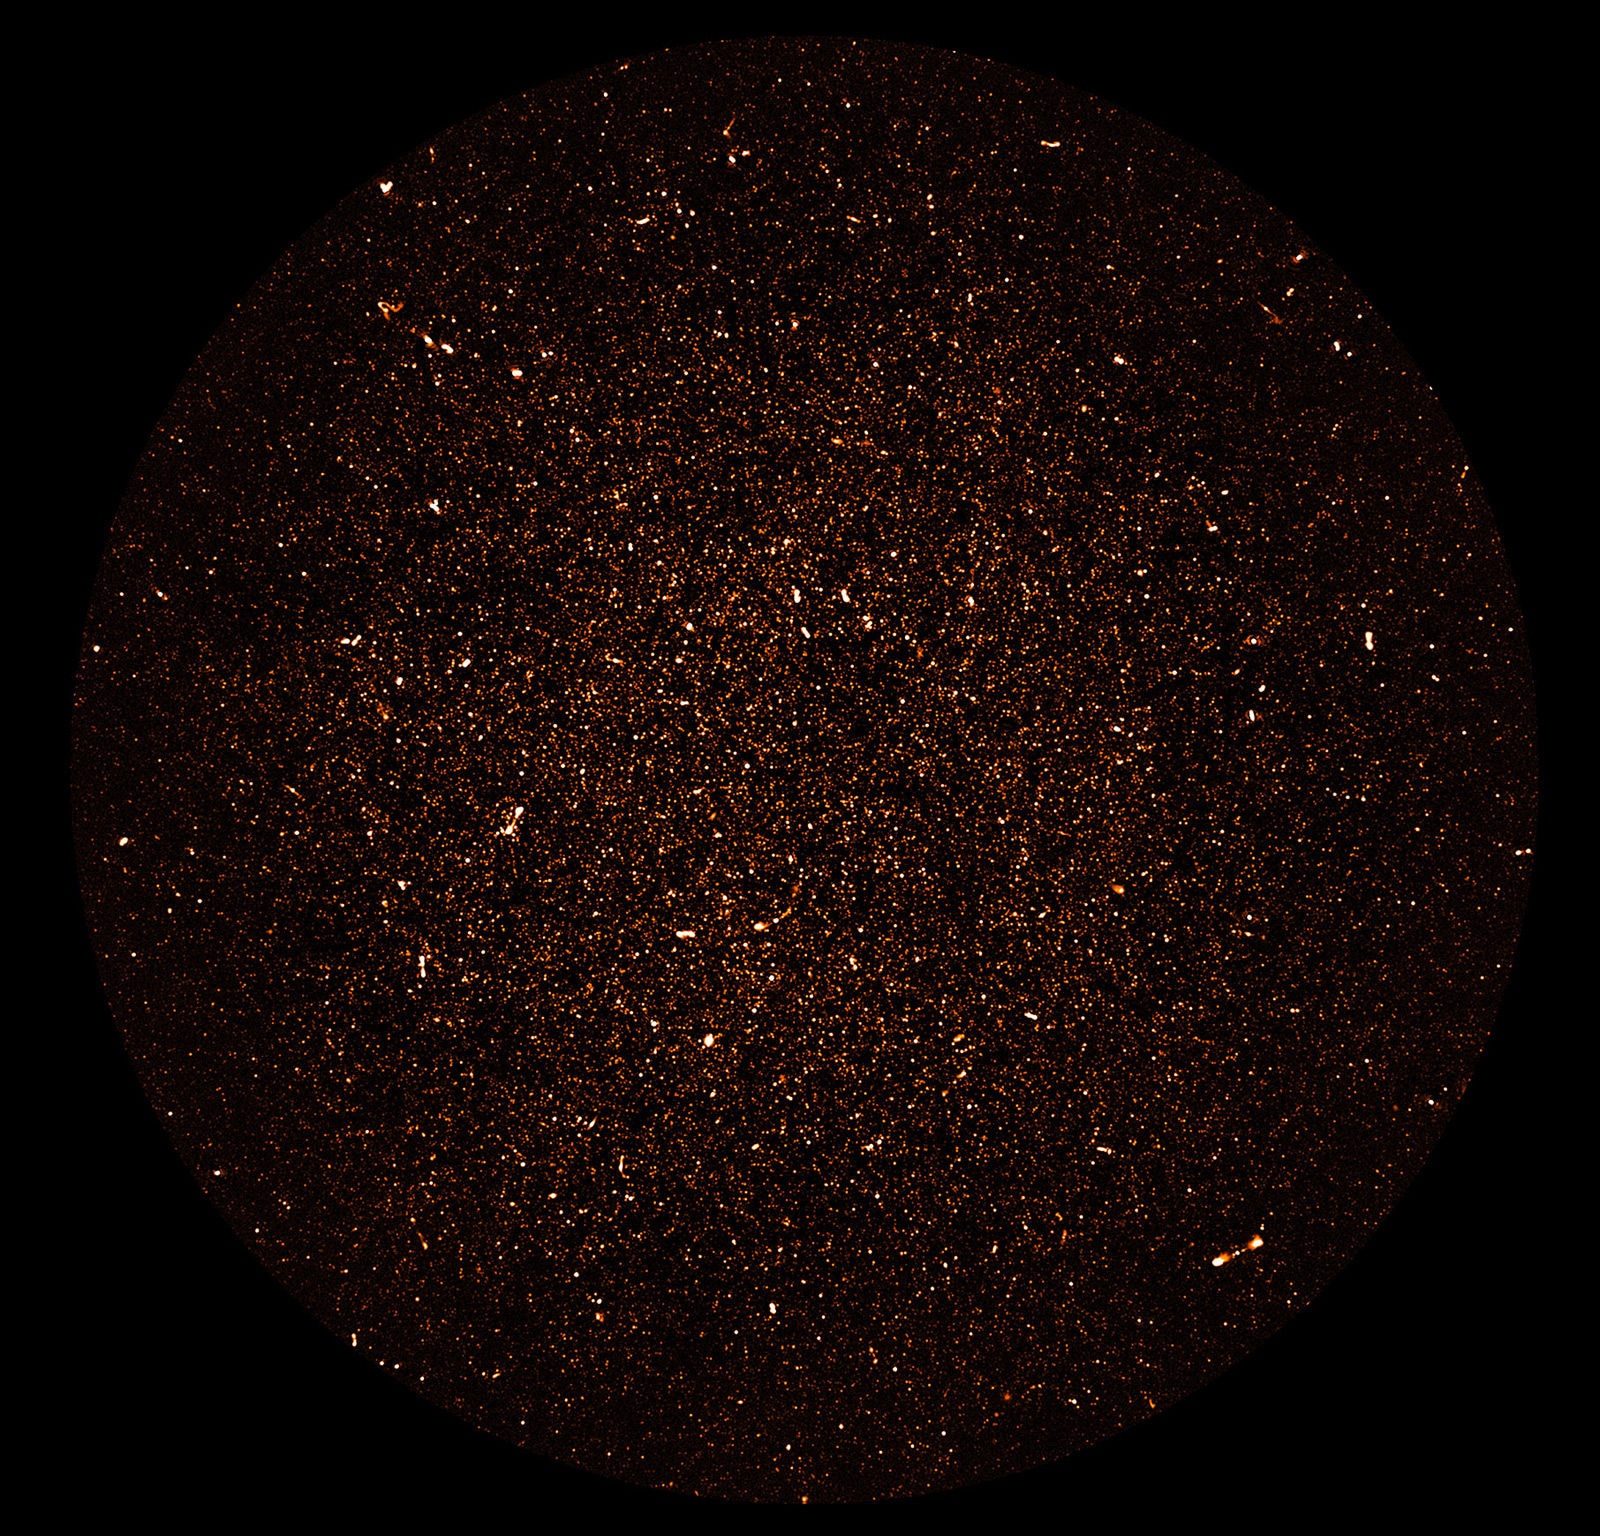 130 hours of MeerKAT observations in radio wavelengths yielded an image of tens of thousands of normal galaxies at distances of billion of light years. Credit: SARAO; NRAO/AUI/NSF